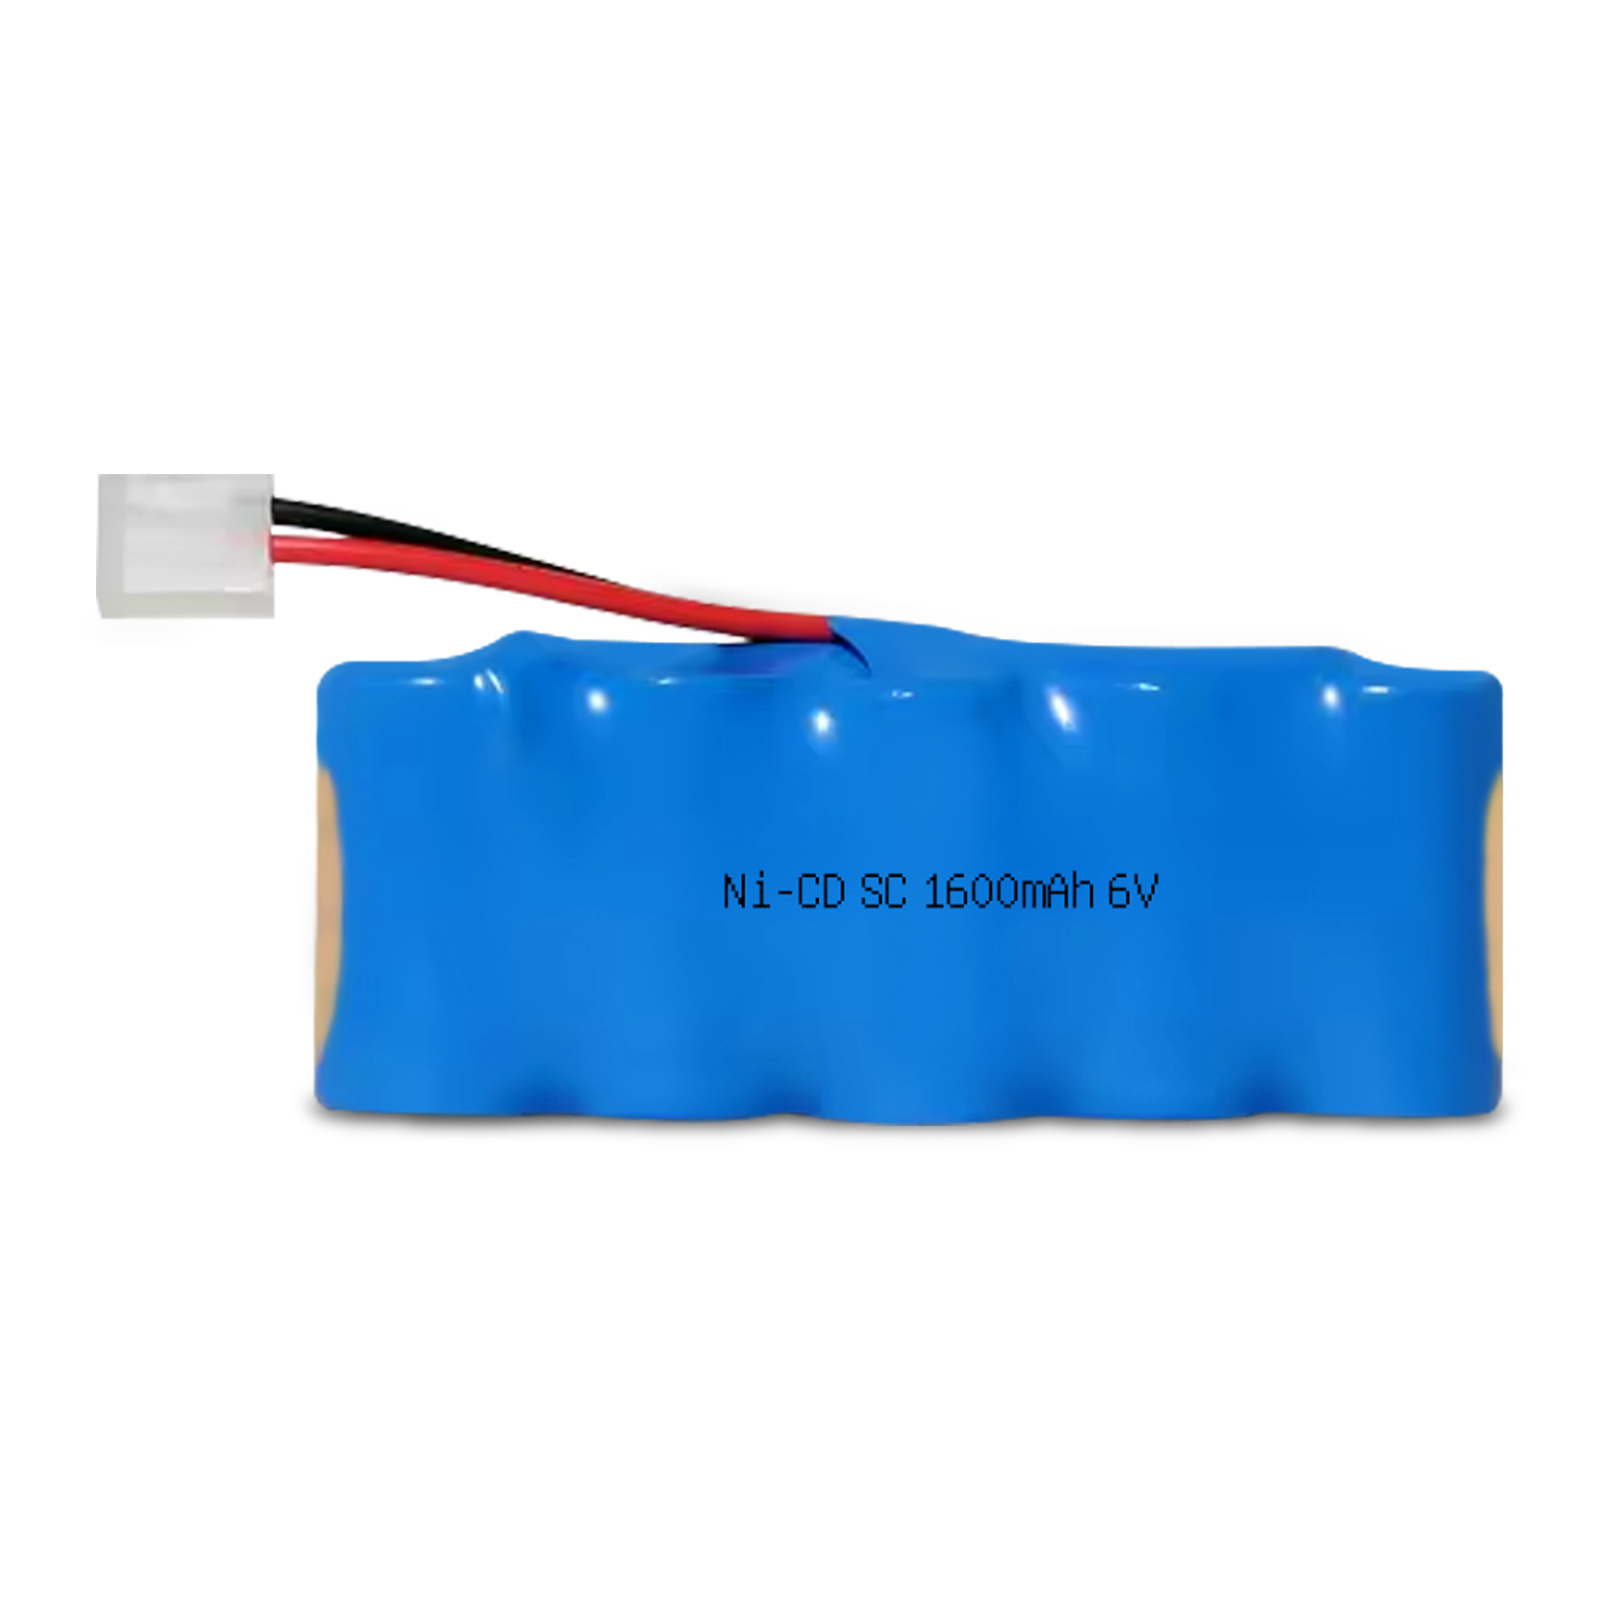 JINTION NICD SC 1600 mAh 6v nicd battery size rechargeable nickel cadmium battery